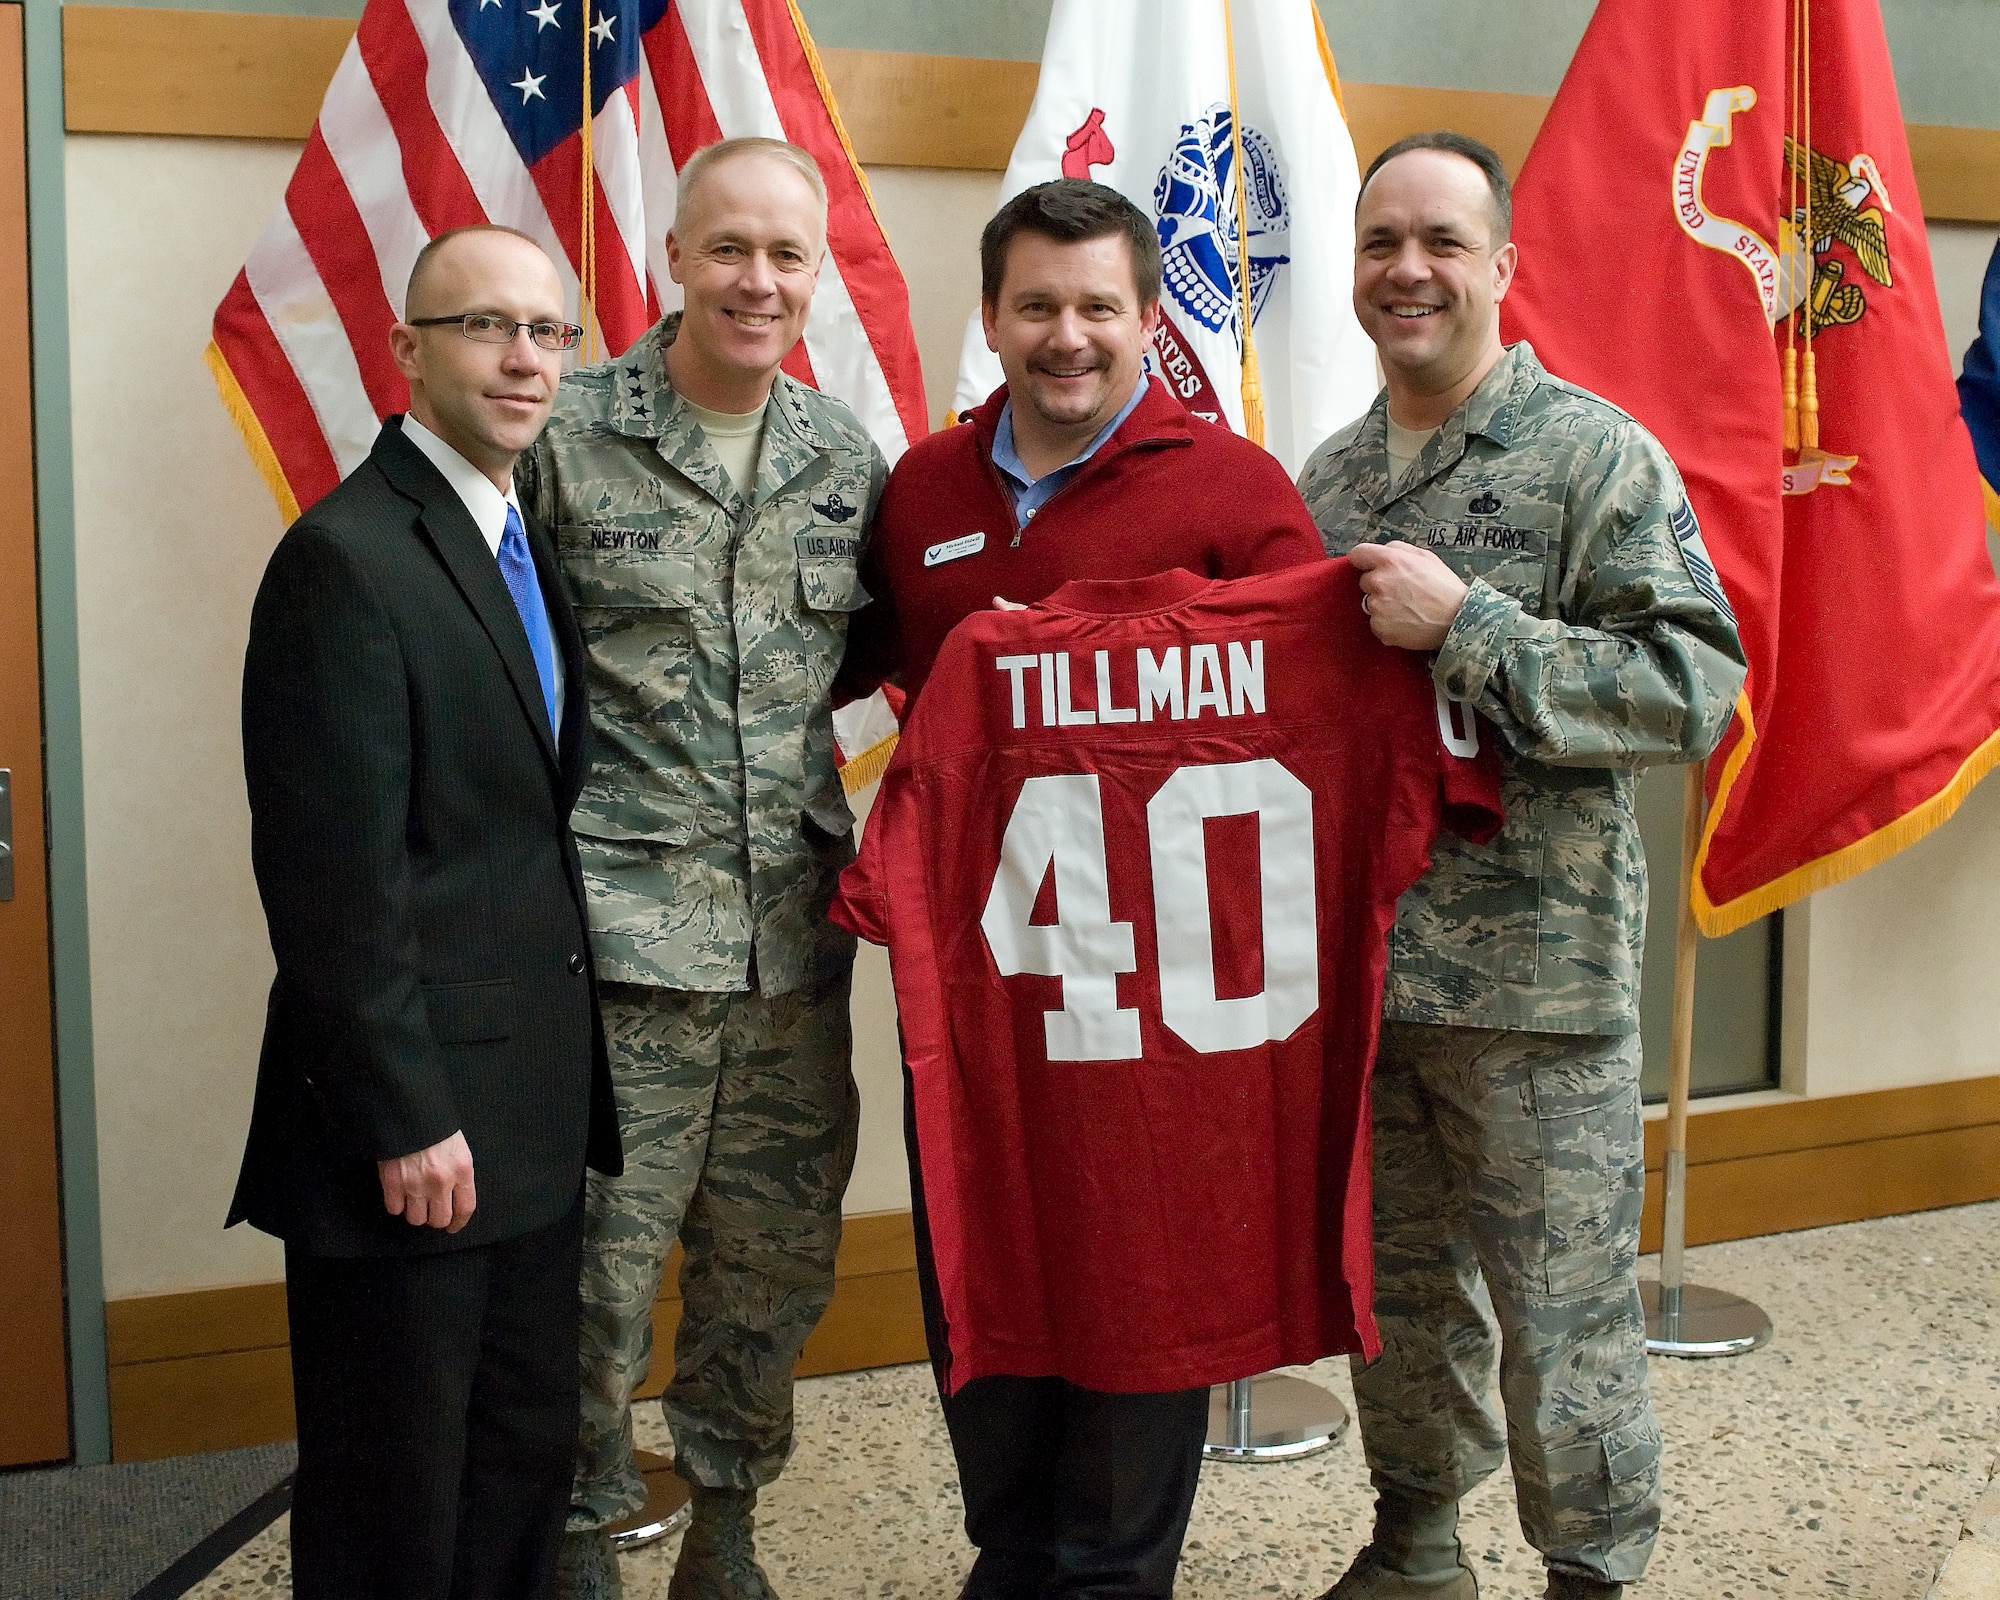 Lt. Gen. Richard Y. Newton III, Air Staff, Headquarters U.S. Air Force, Washington, D.C., assistant vice chief of staff and director, accepts a Pat Tillman jersey from Michael Bidwill, president of the Arizona Cardinals Football Club. Trevor Dean, deputy to the commander, Air Force Mortuary Affairs Operations and Chief Master Sgt. David Fish, chief enlisted manager accept the jersey on behalf of AFMAO. (U.S. Air Force photo/Jason Minto)